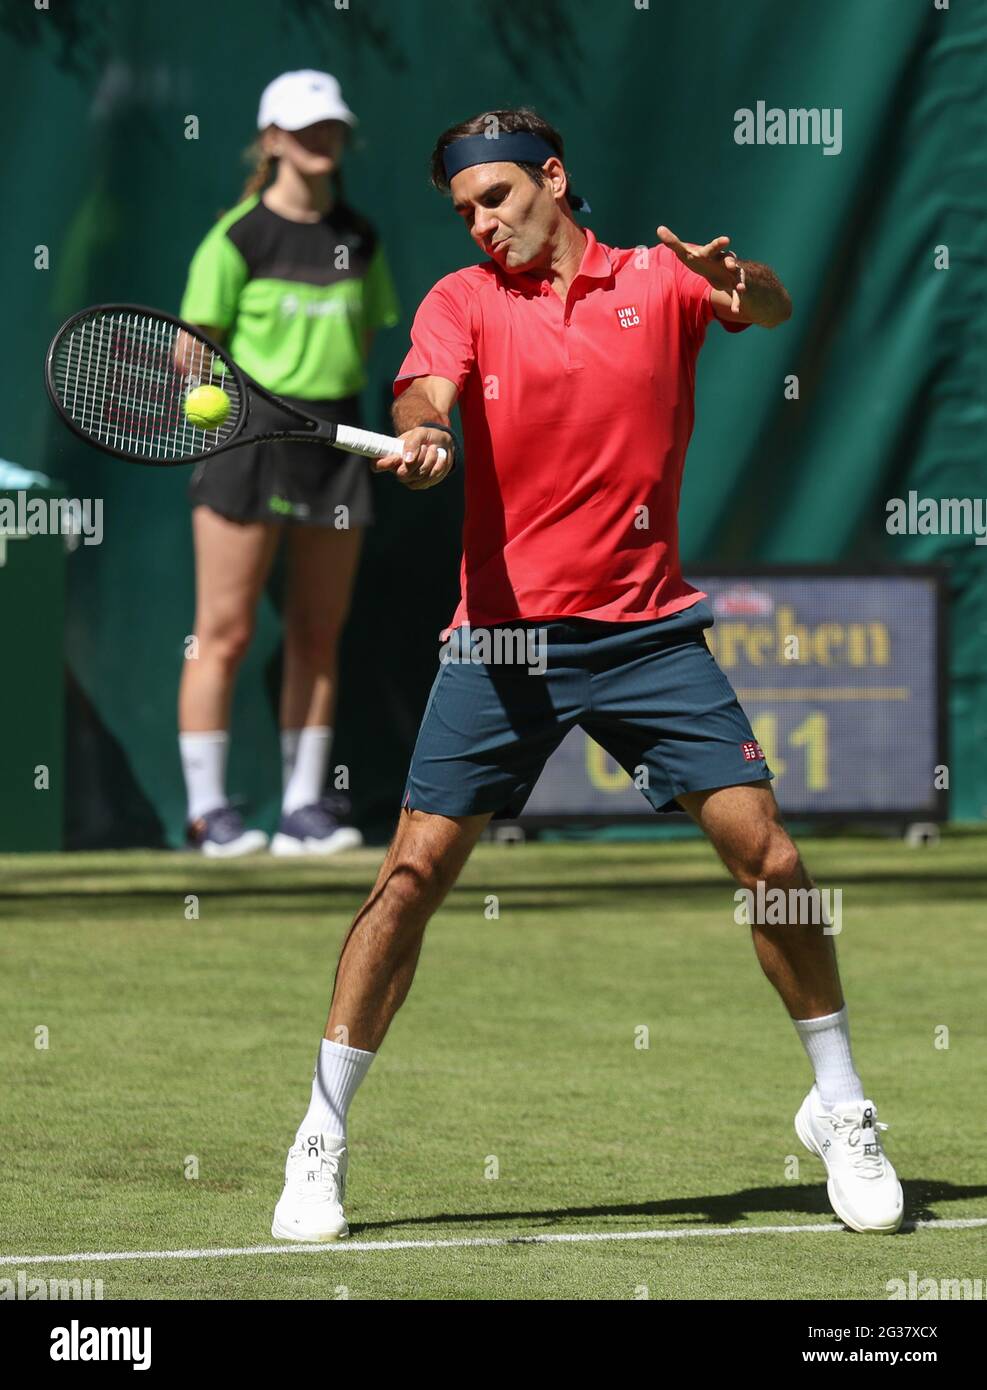 Roger Federer forehand High Resolution Stock Photography and Images - Alamy